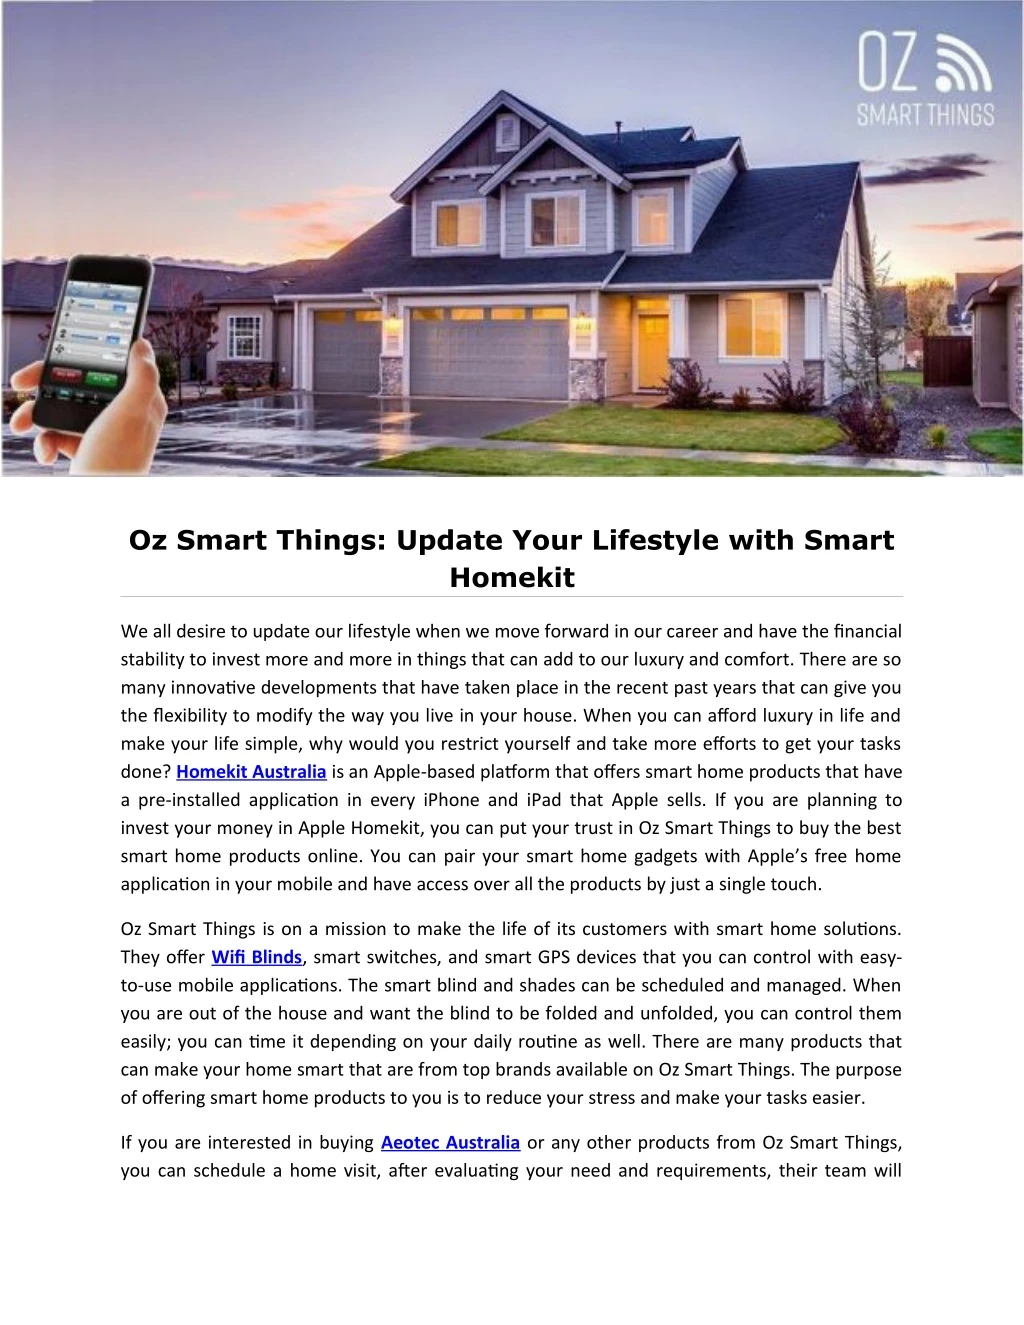 oz smart things update your lifestyle with smart